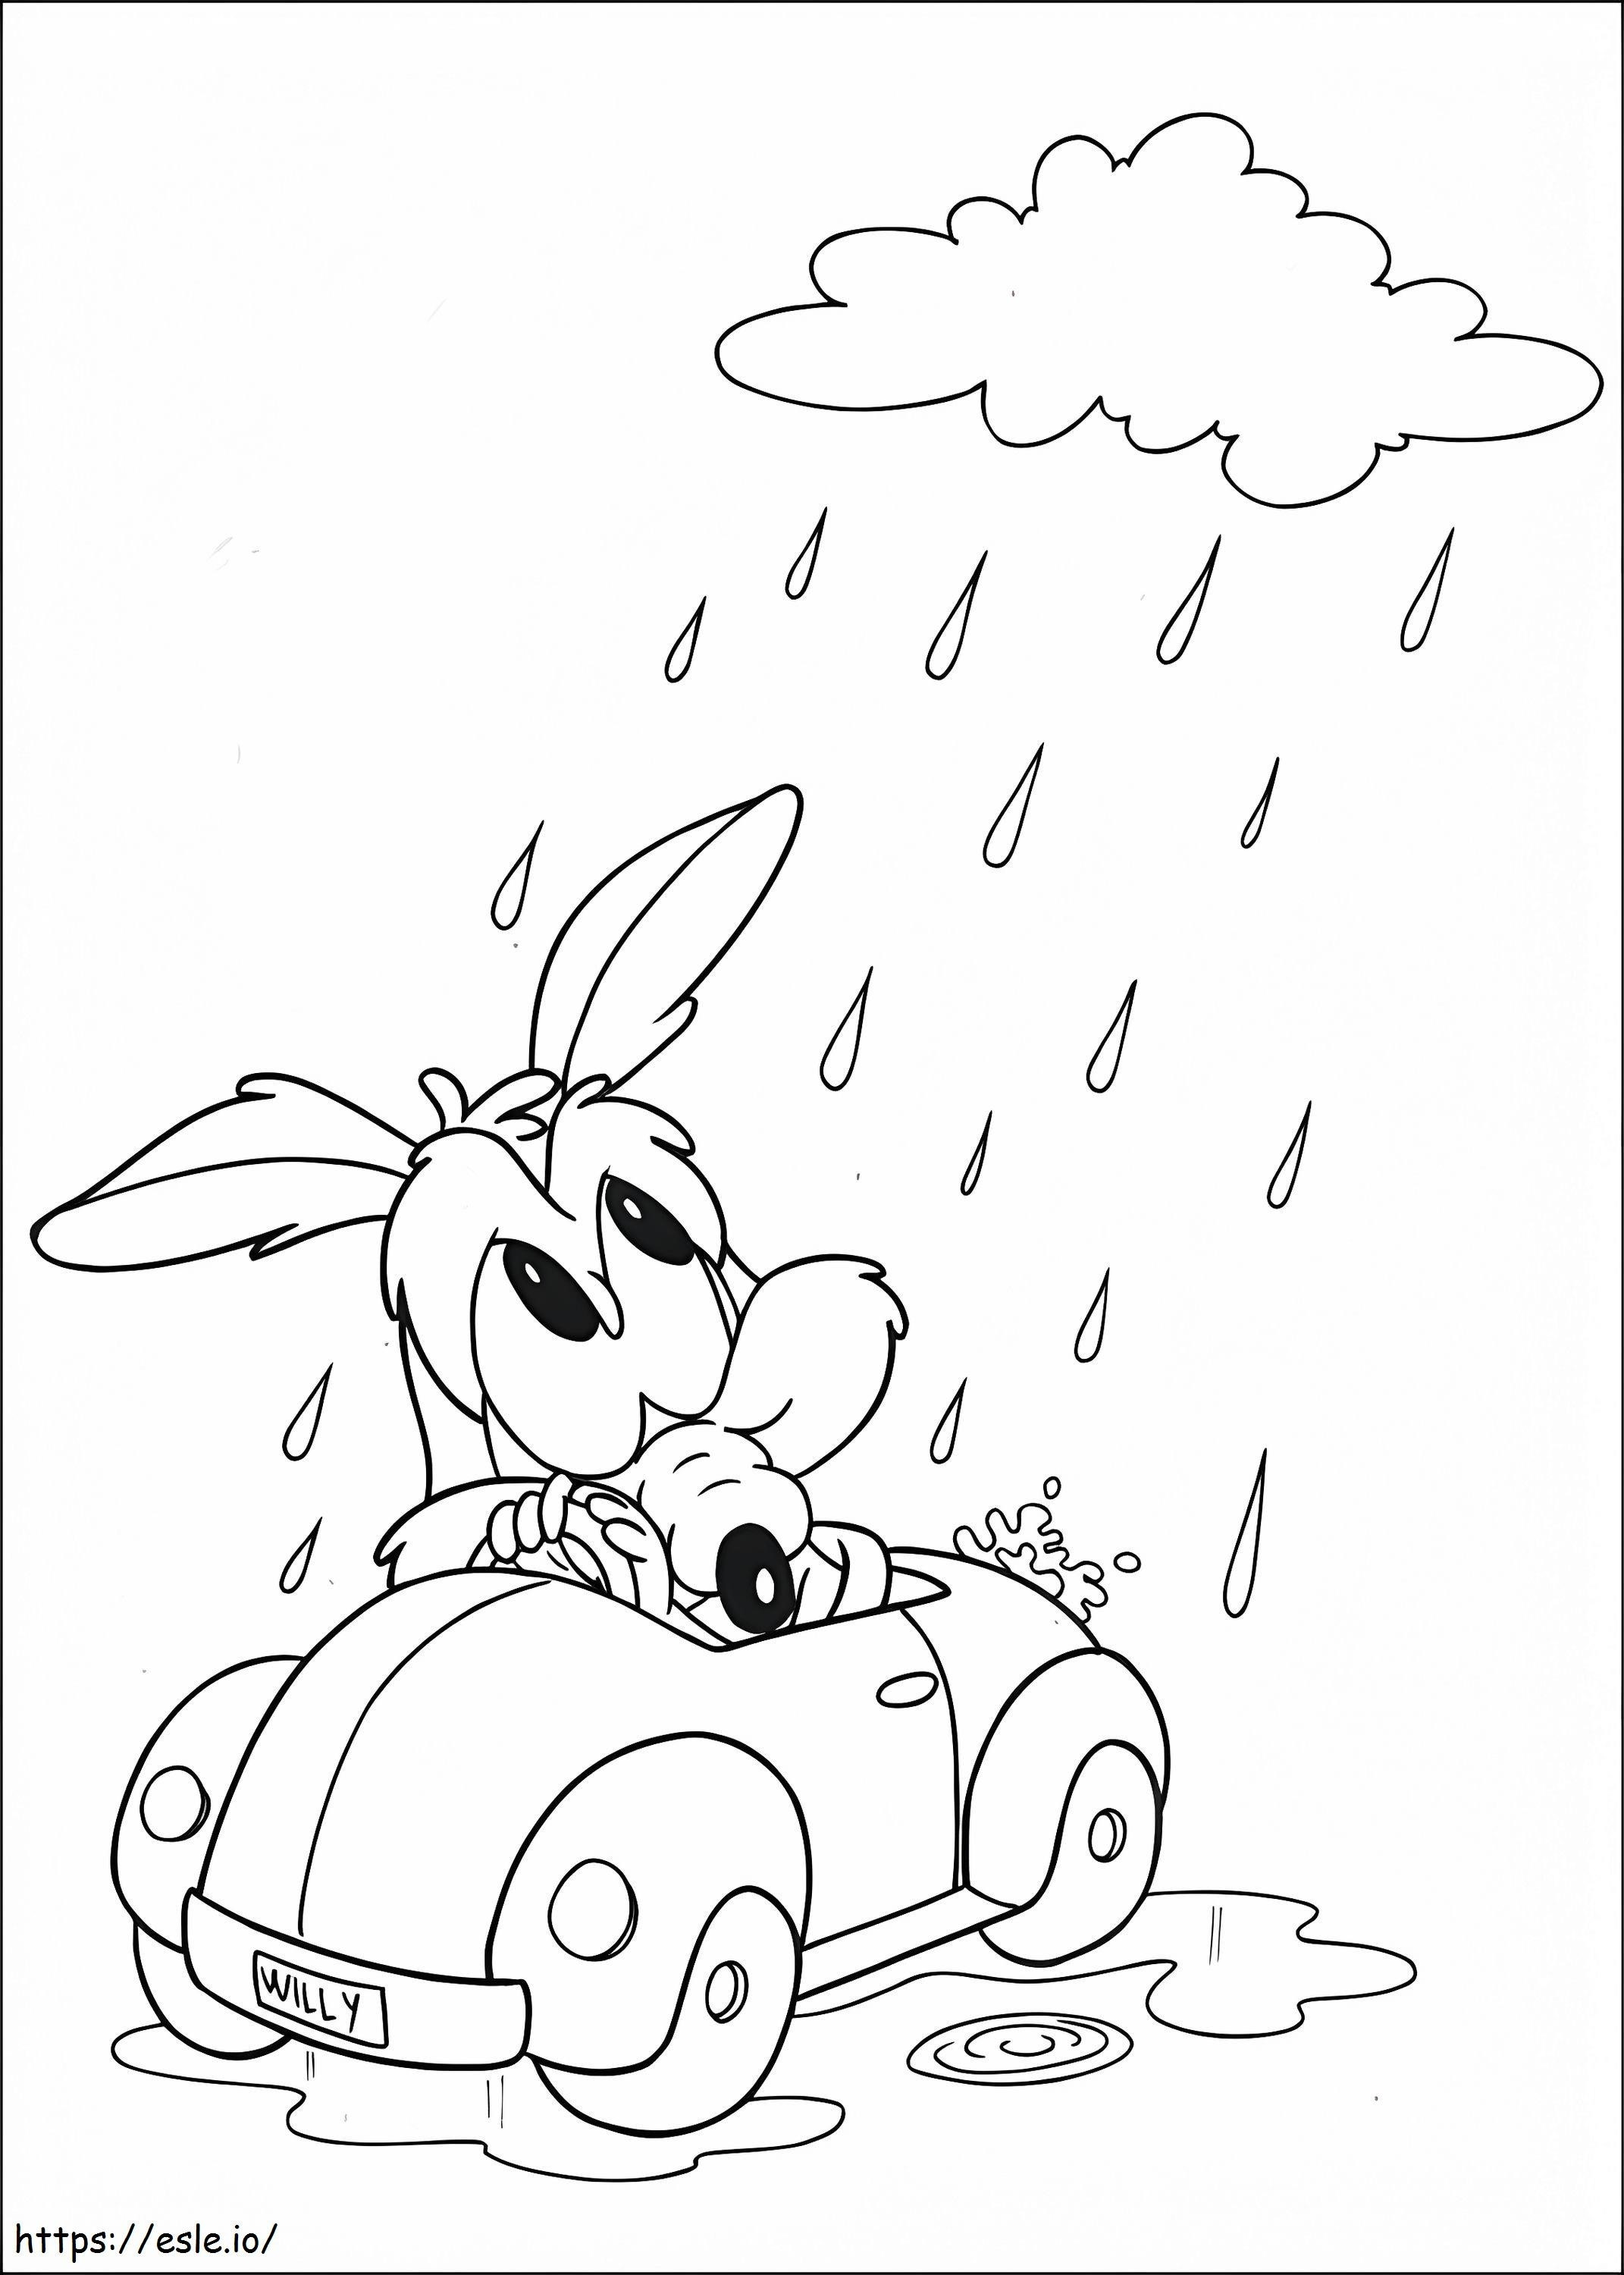 1533780052 Baby Wile E In The Rain A4 coloring page